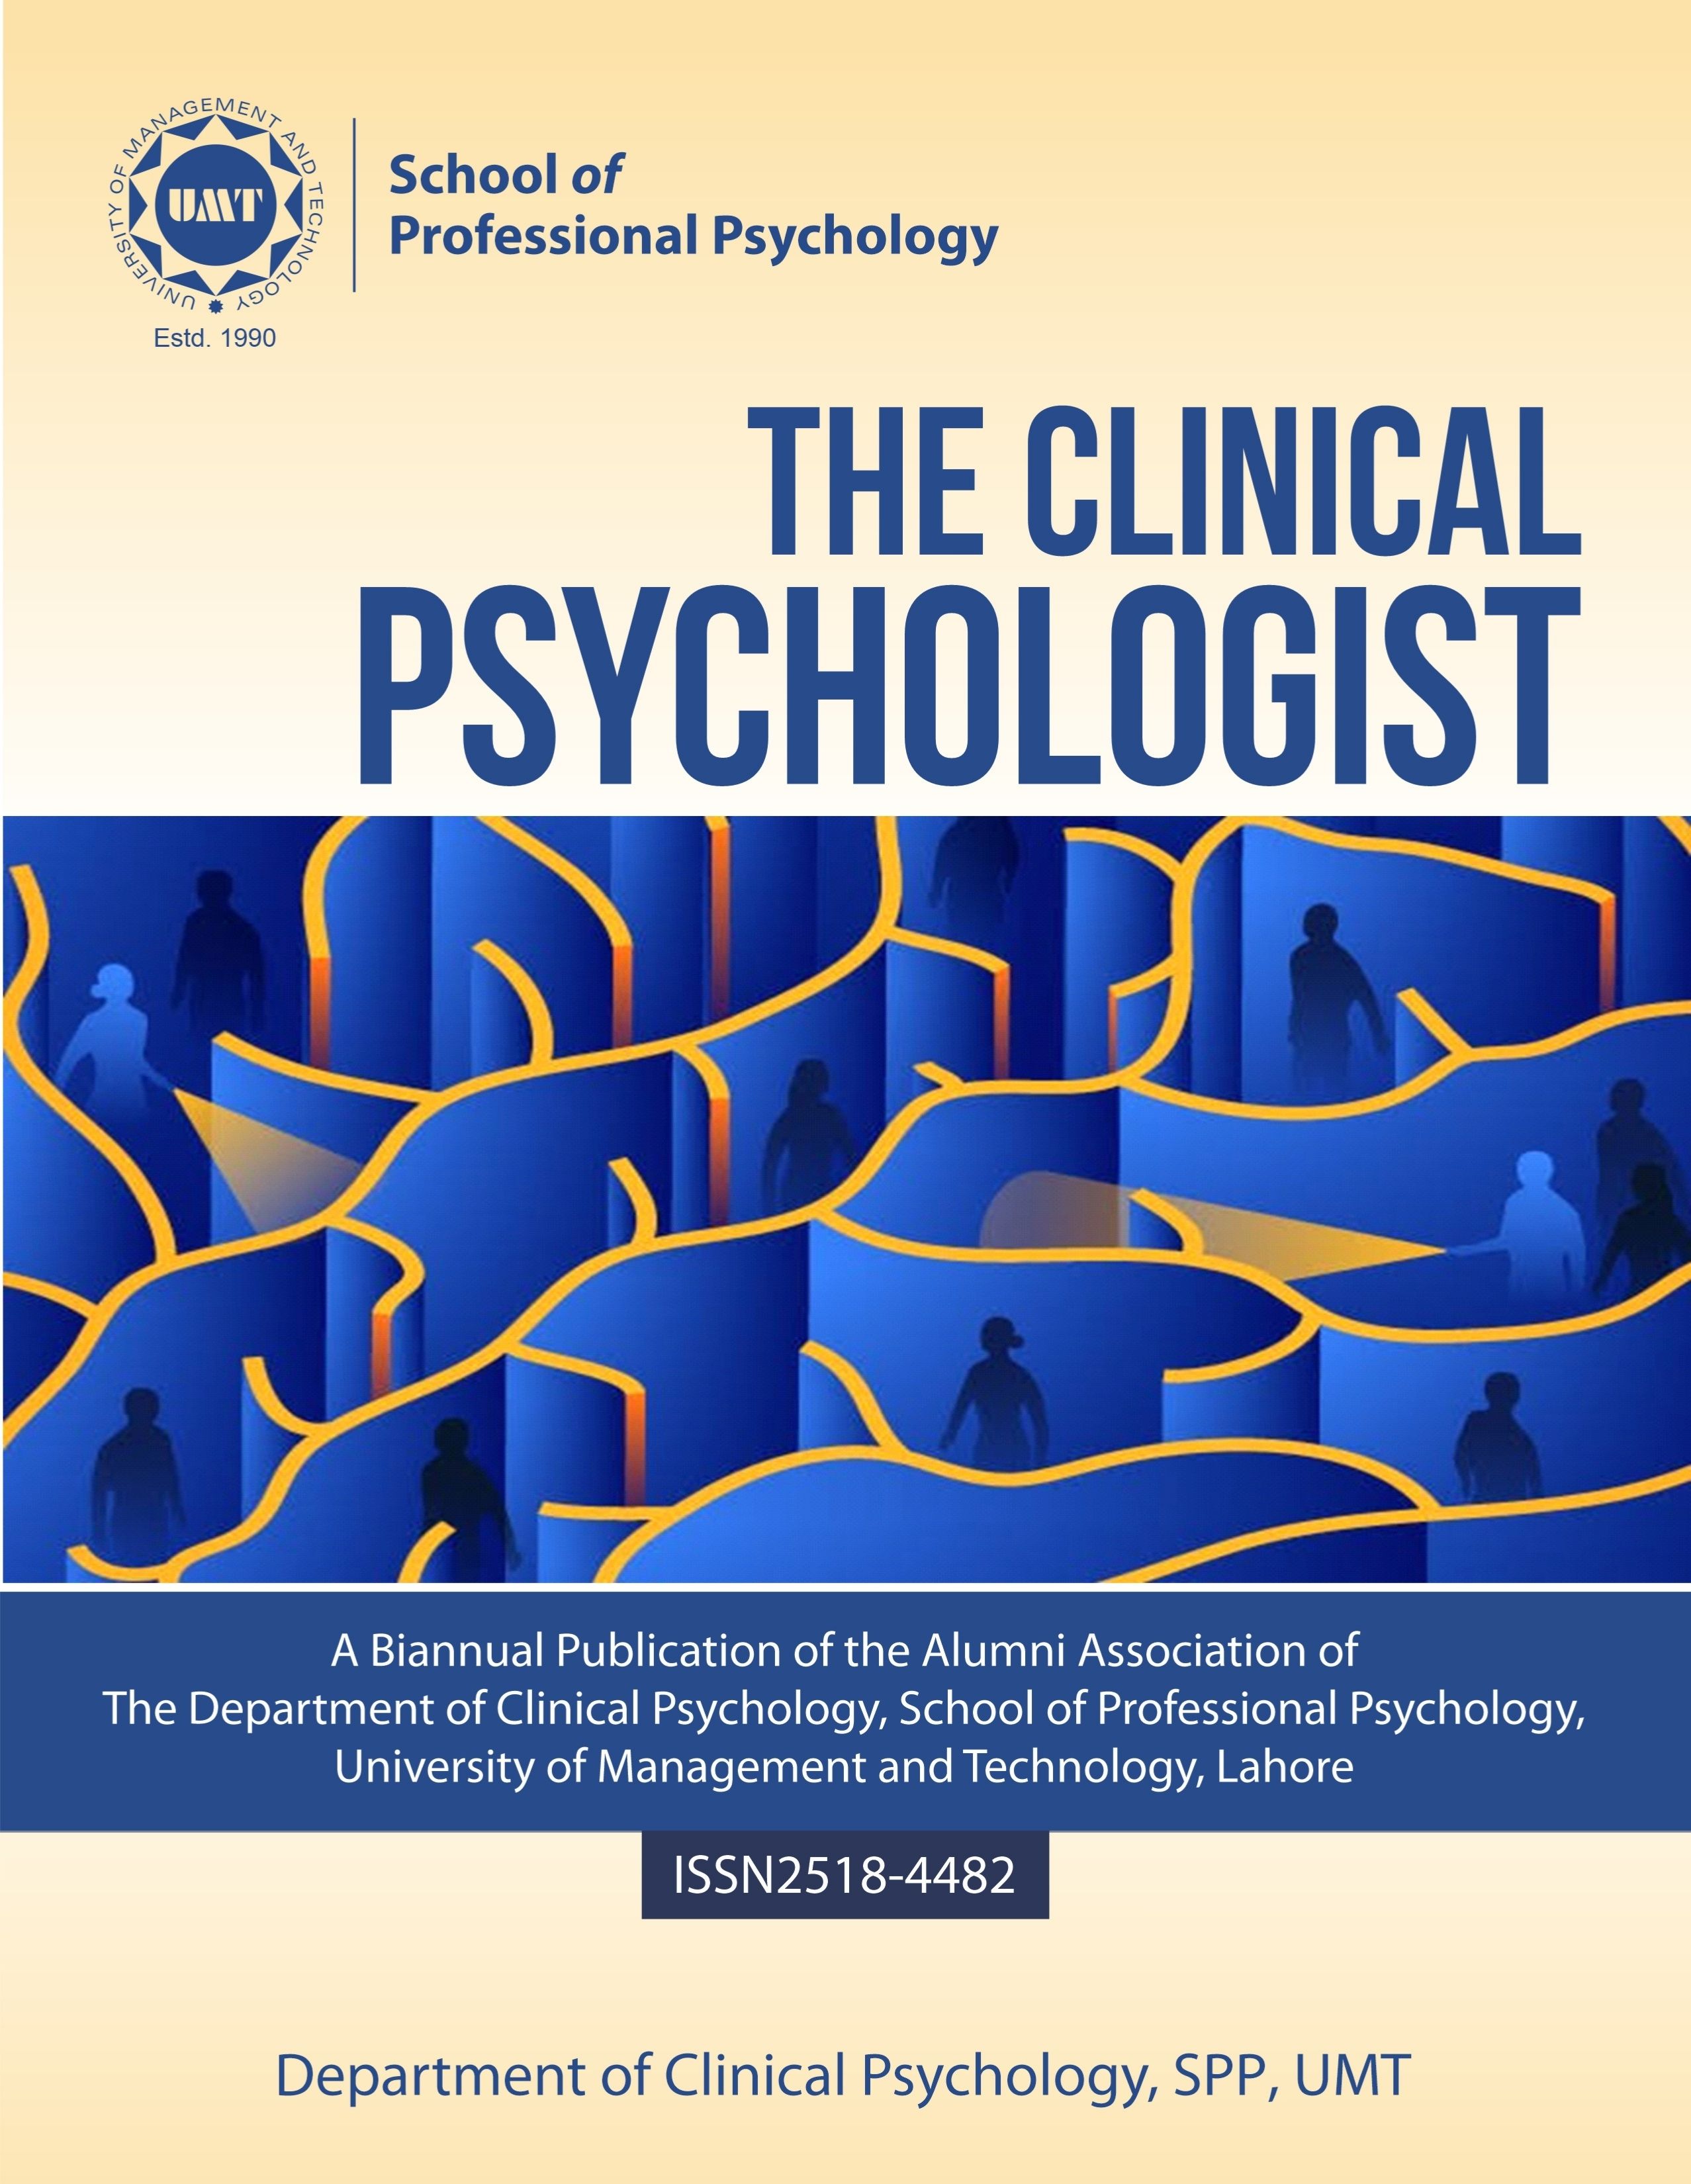 The clinical psychologist